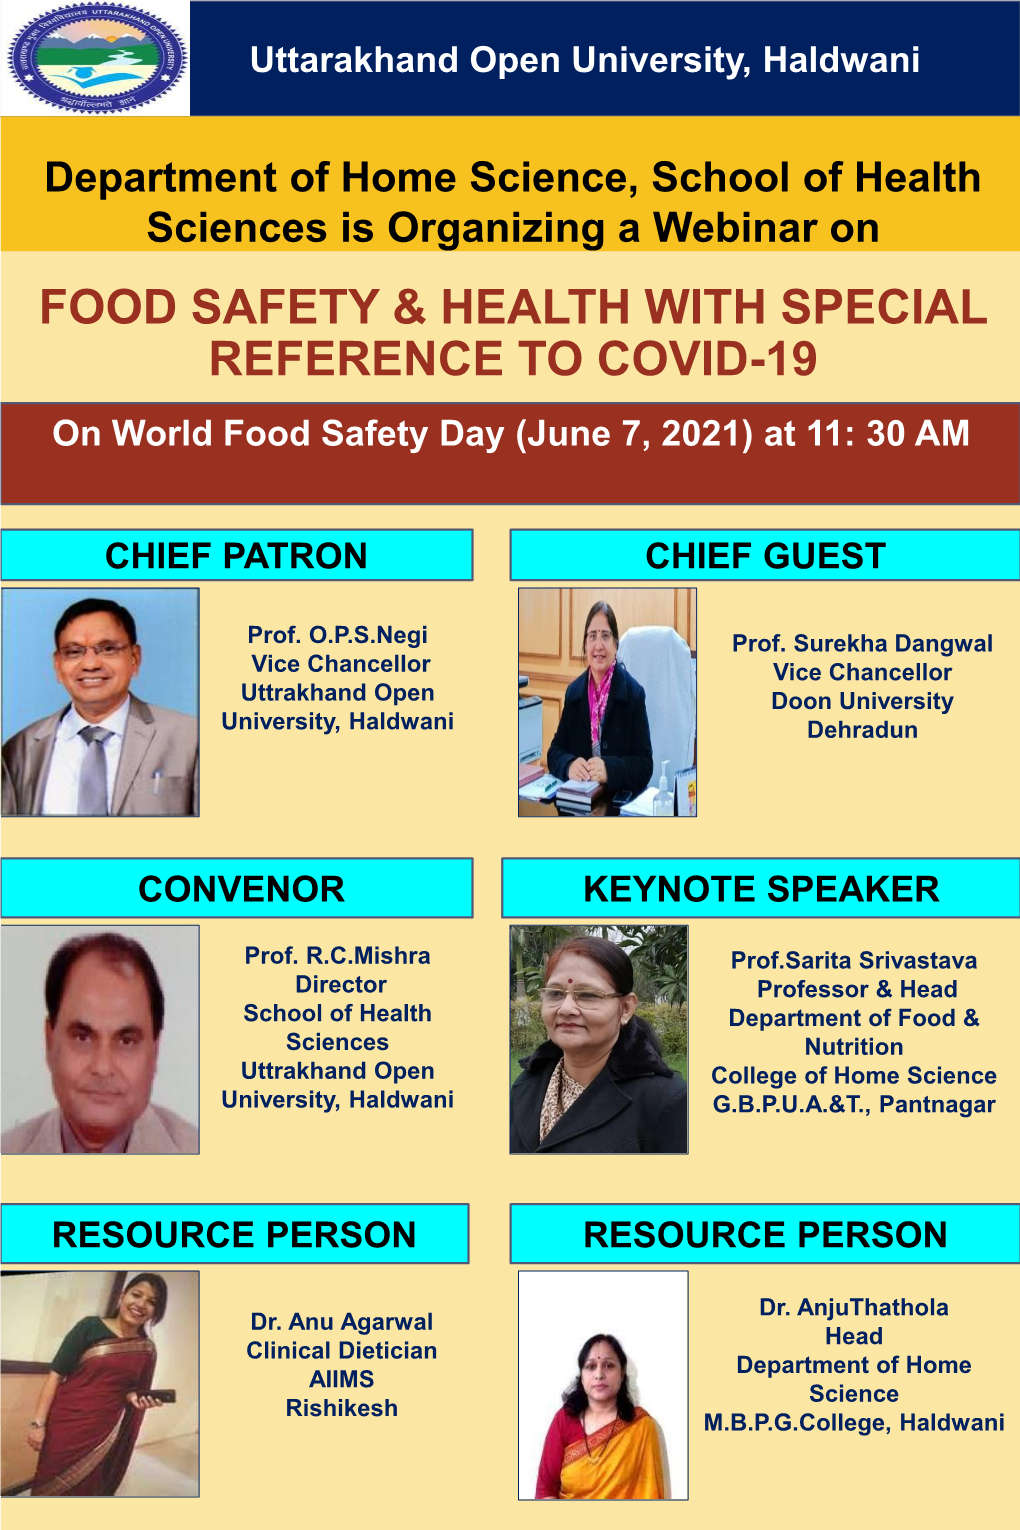 Food Safety & Health with Special Reference to Covid